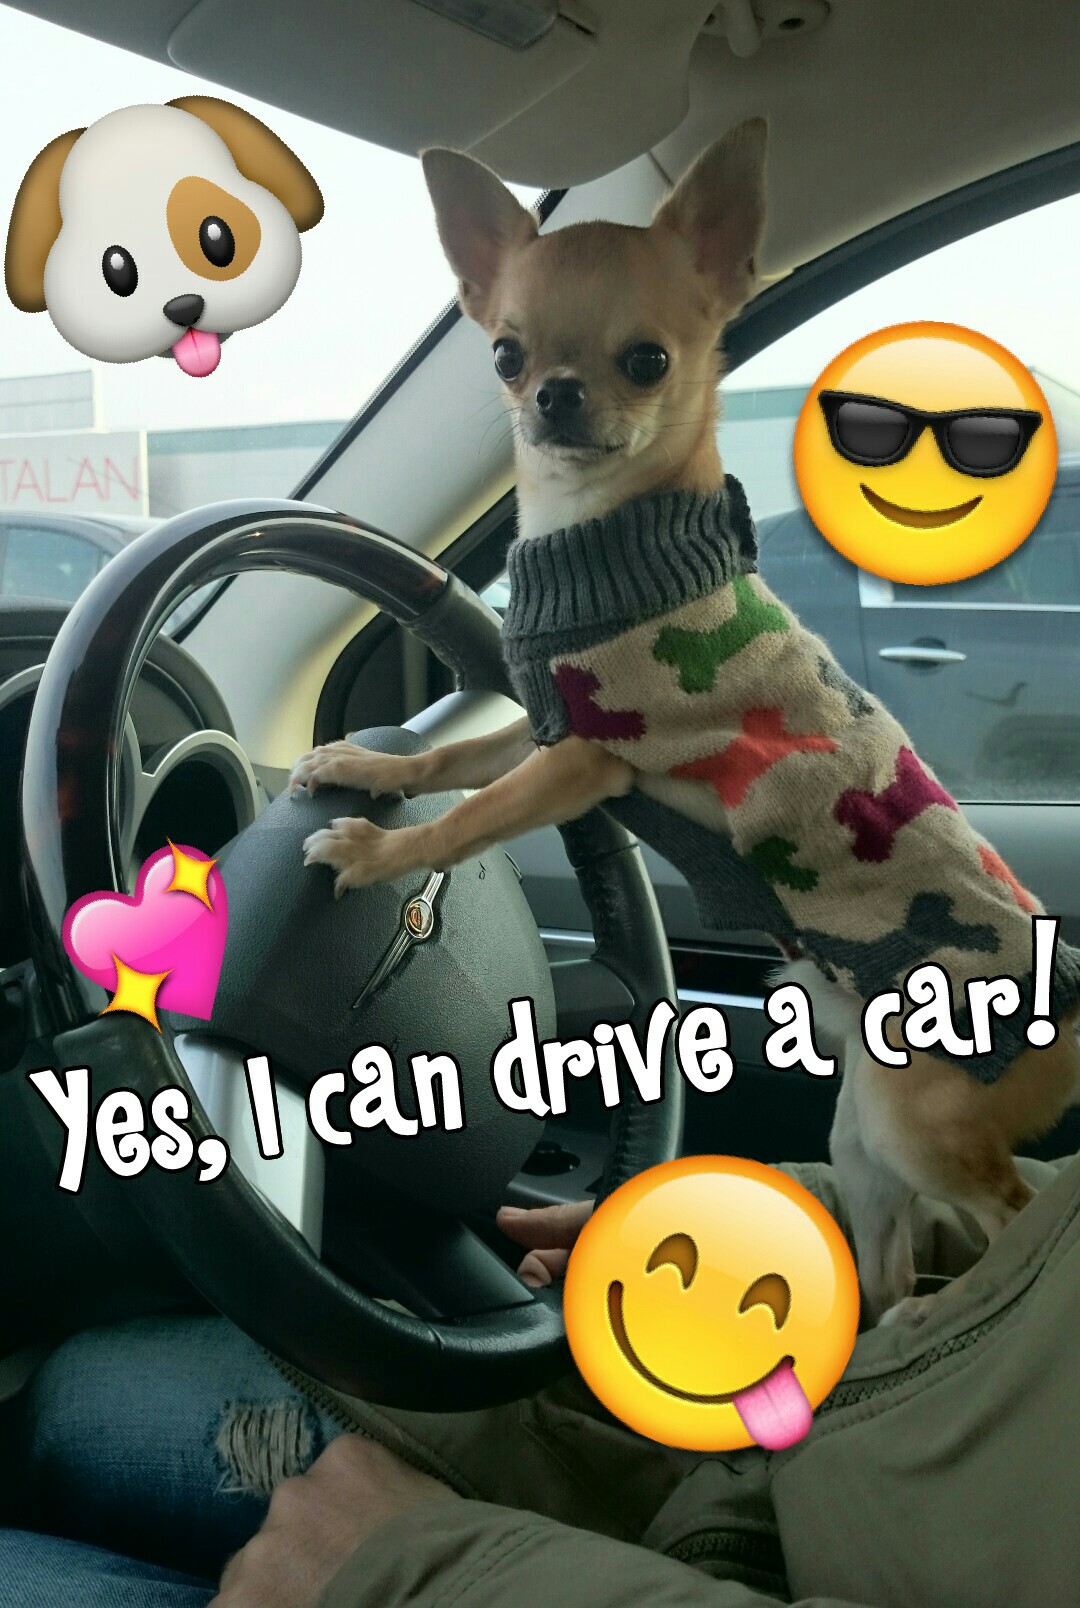 Yes, I can drive a car!